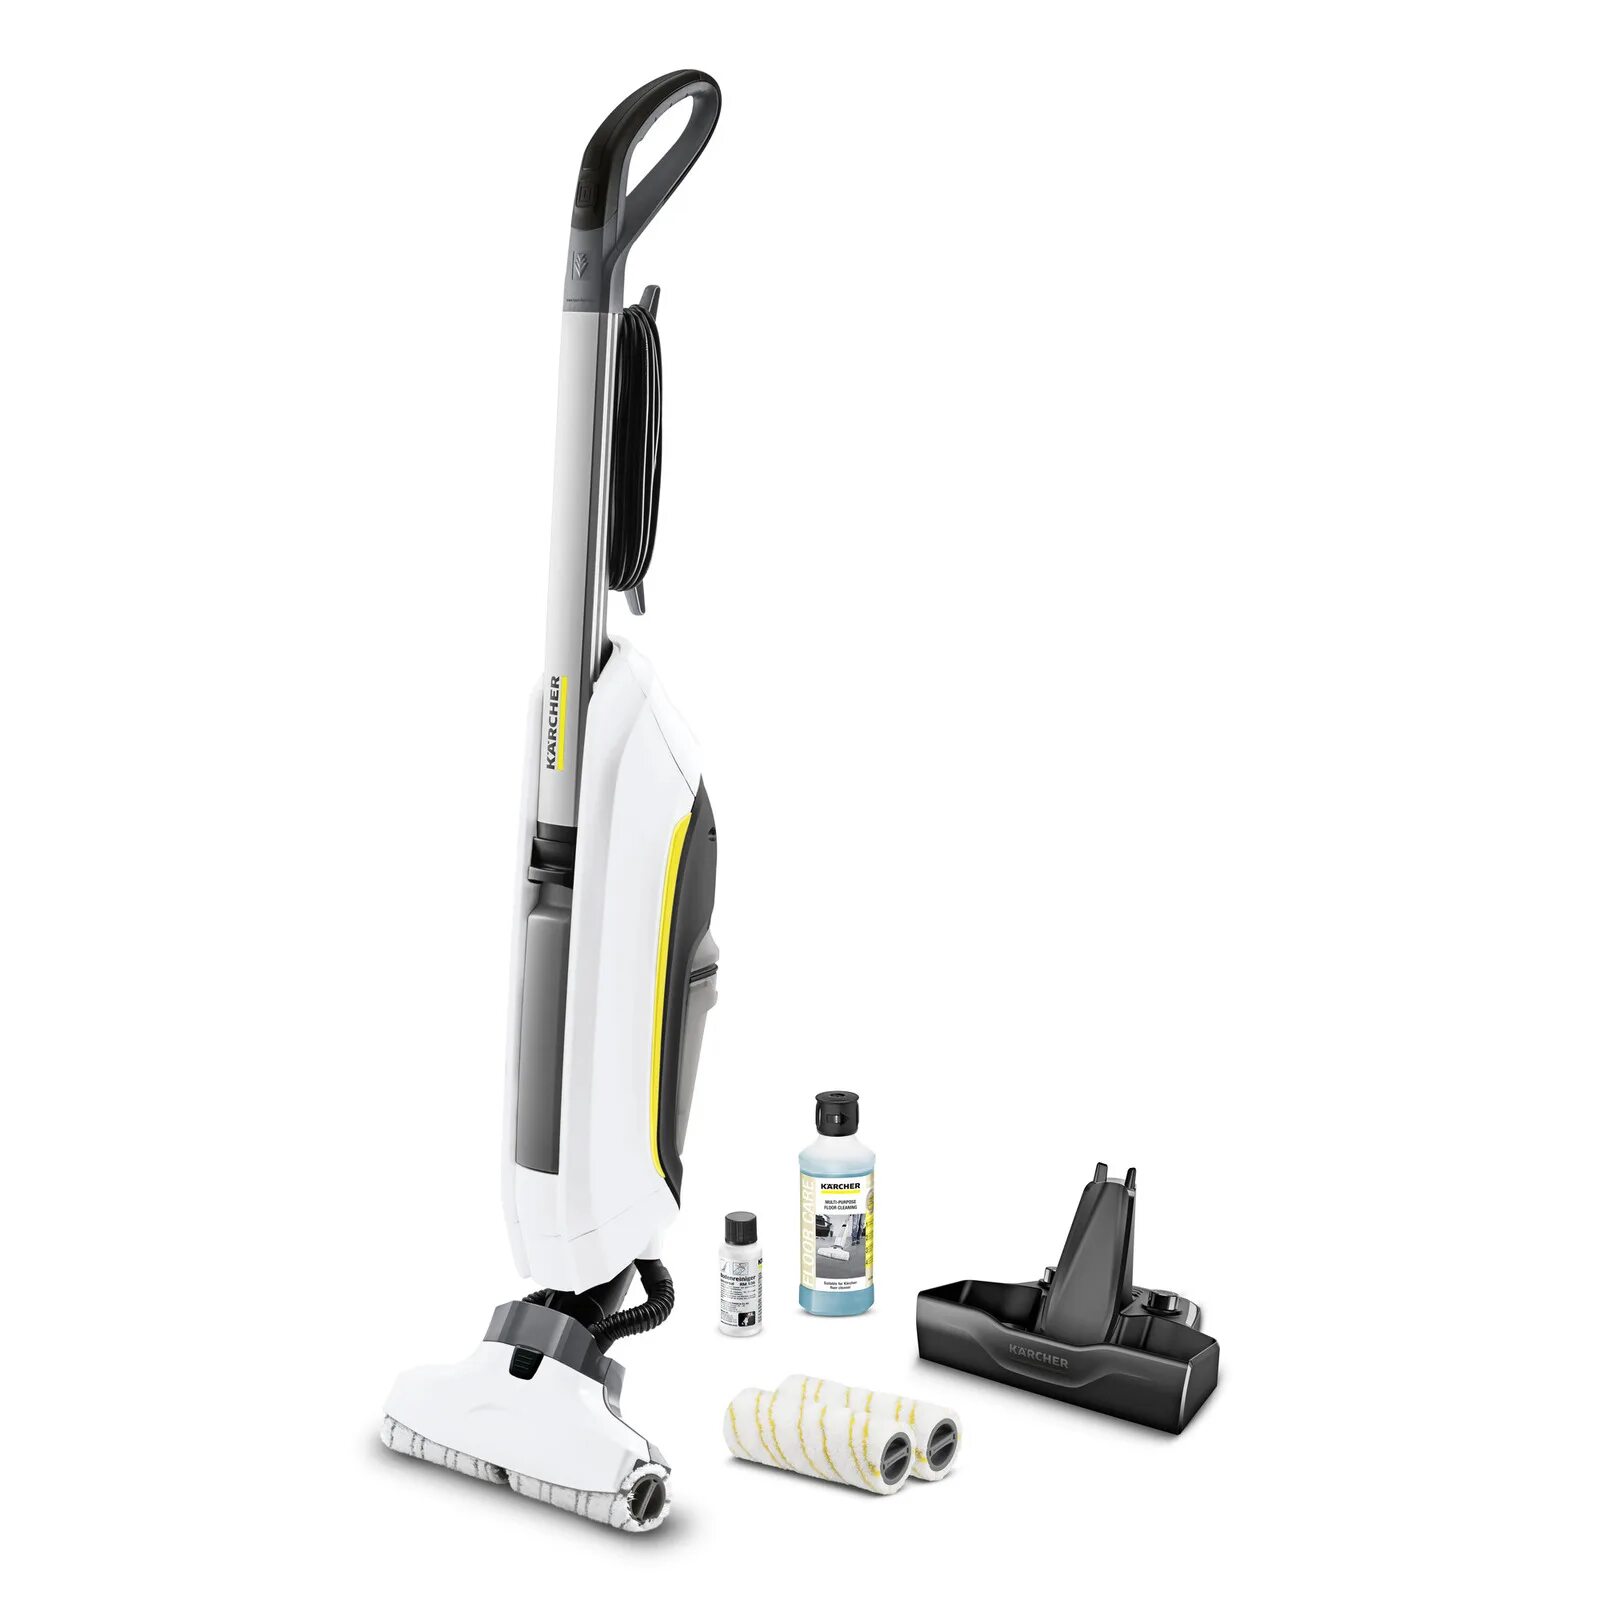 Электрошвабра Karcher fc5 Cordless Premium. Электрошвабра Karcher FC 5. Электрошвабра Karcher FC 7 Cordless Premium. Karcher FC 5 Cordless.